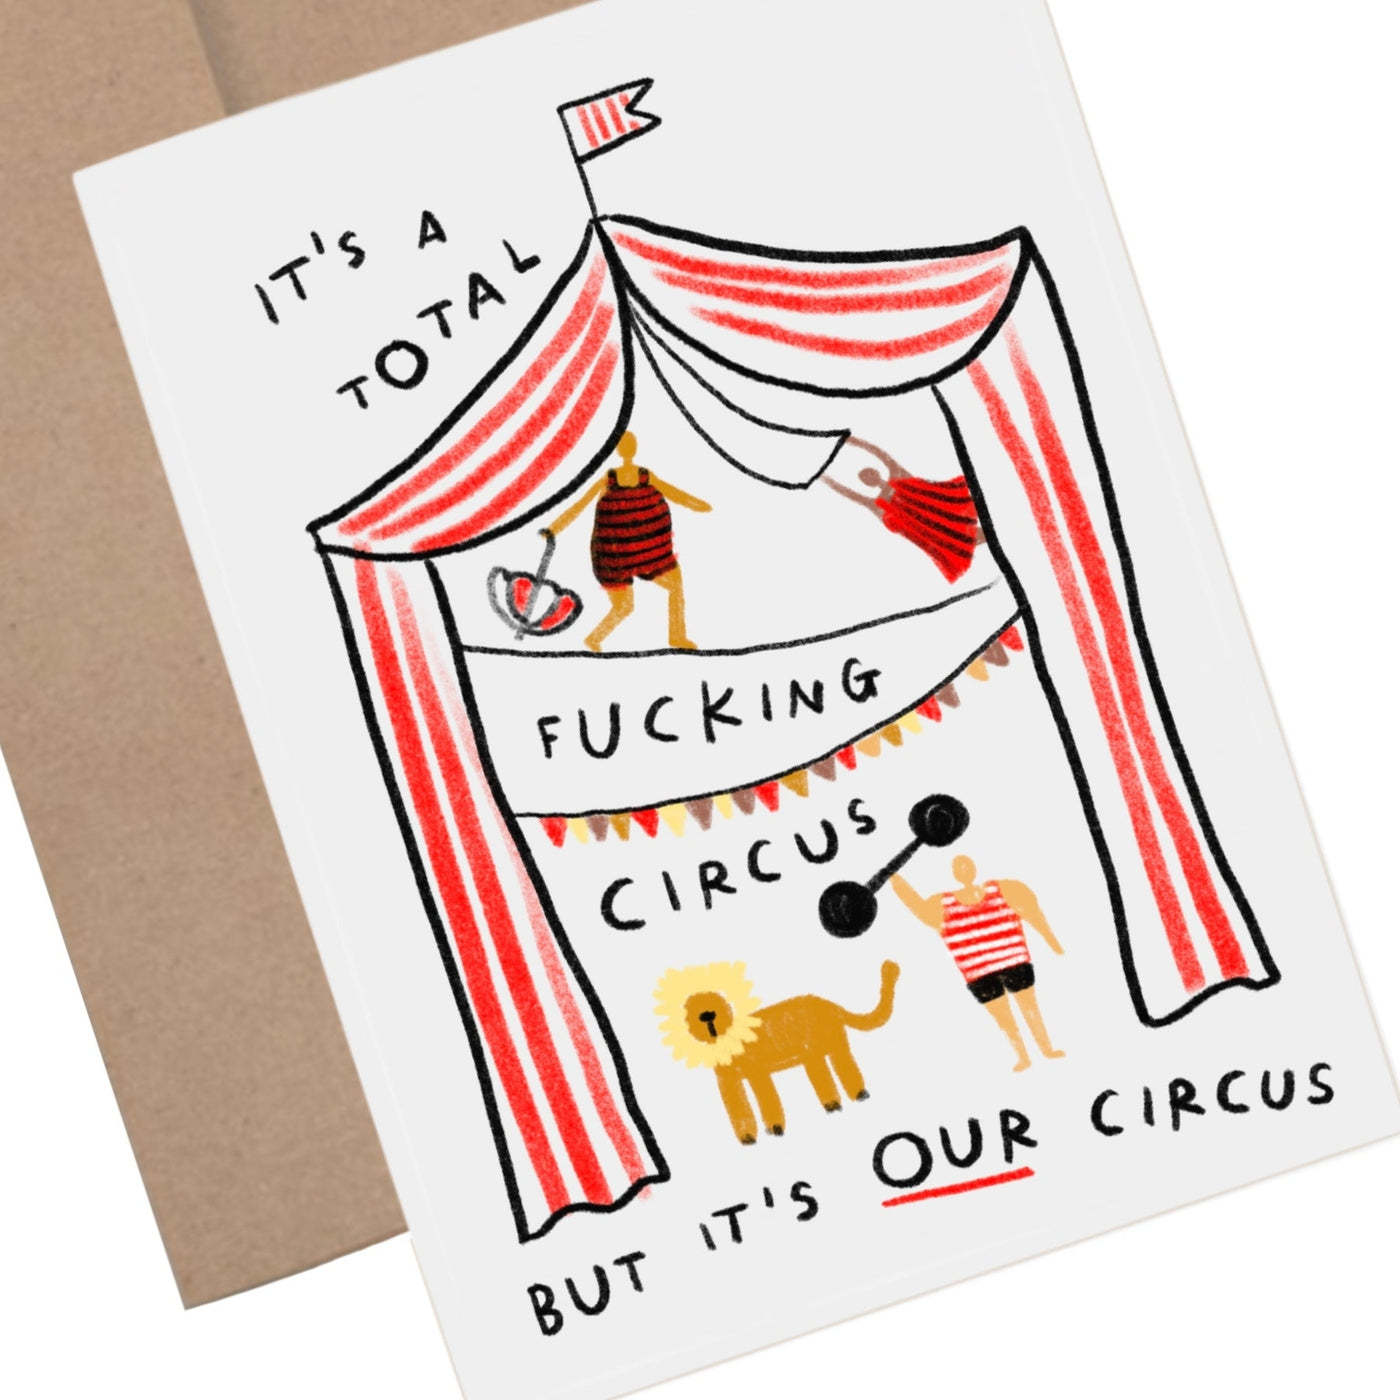 But It's Our Circus Greeting Card